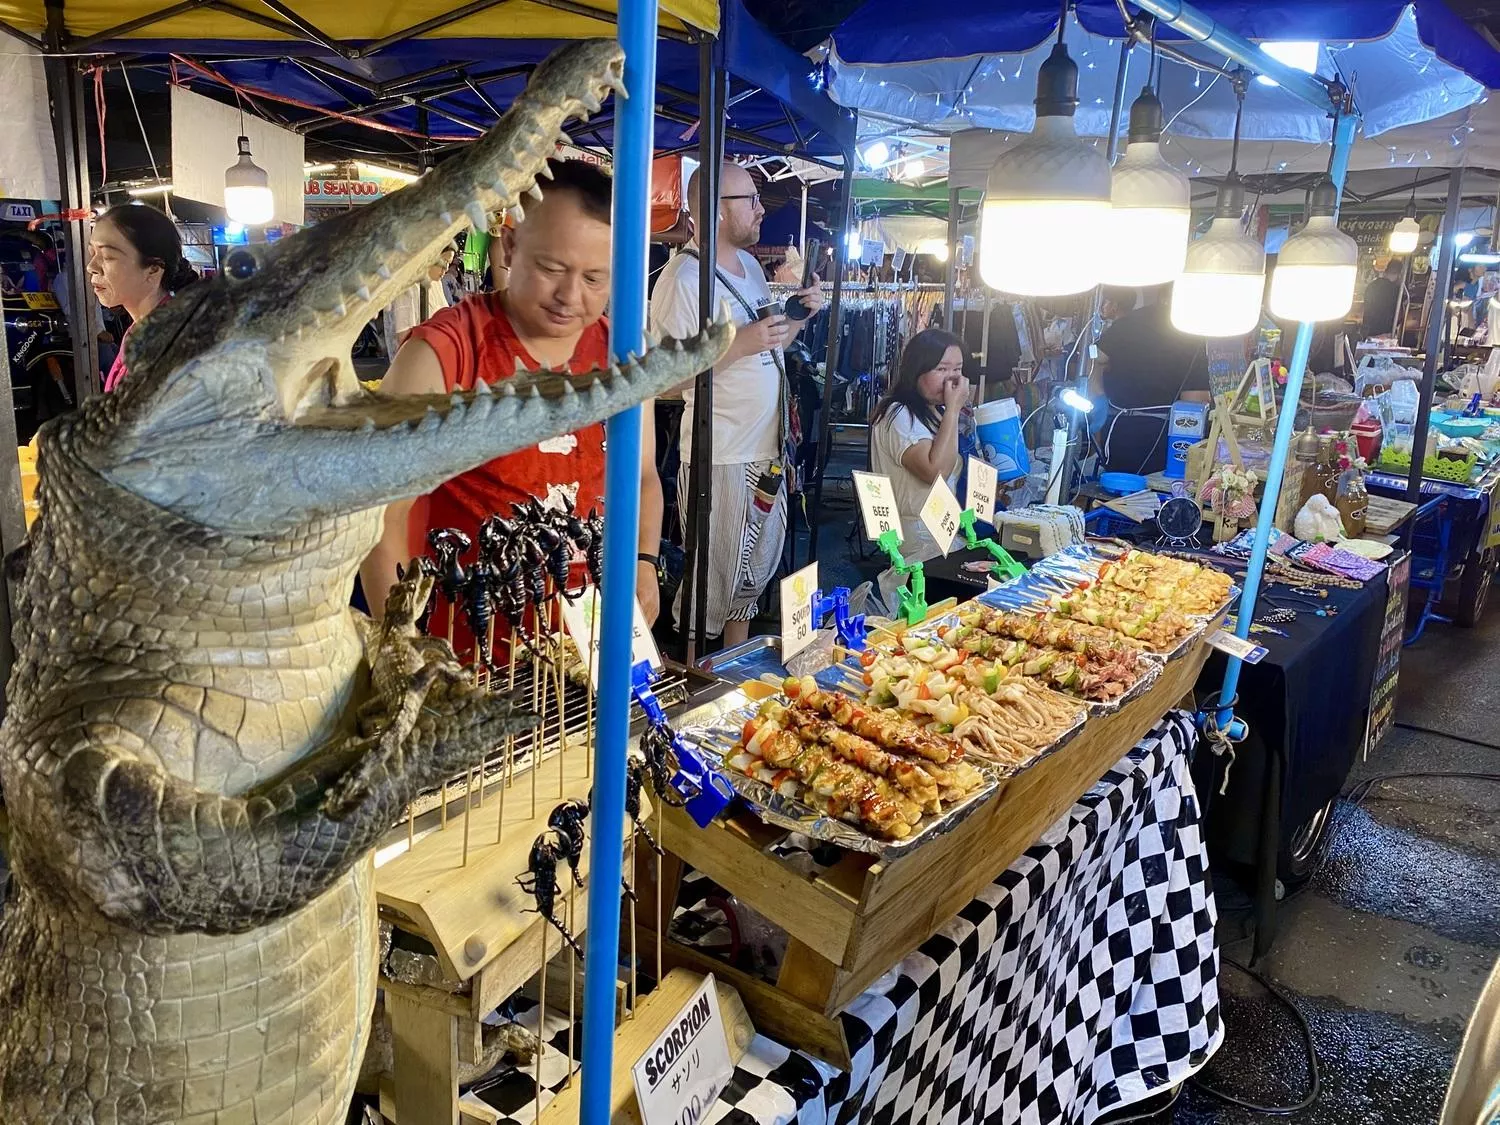 Small alligator statue next to barbecue food stand that sells alligator meat